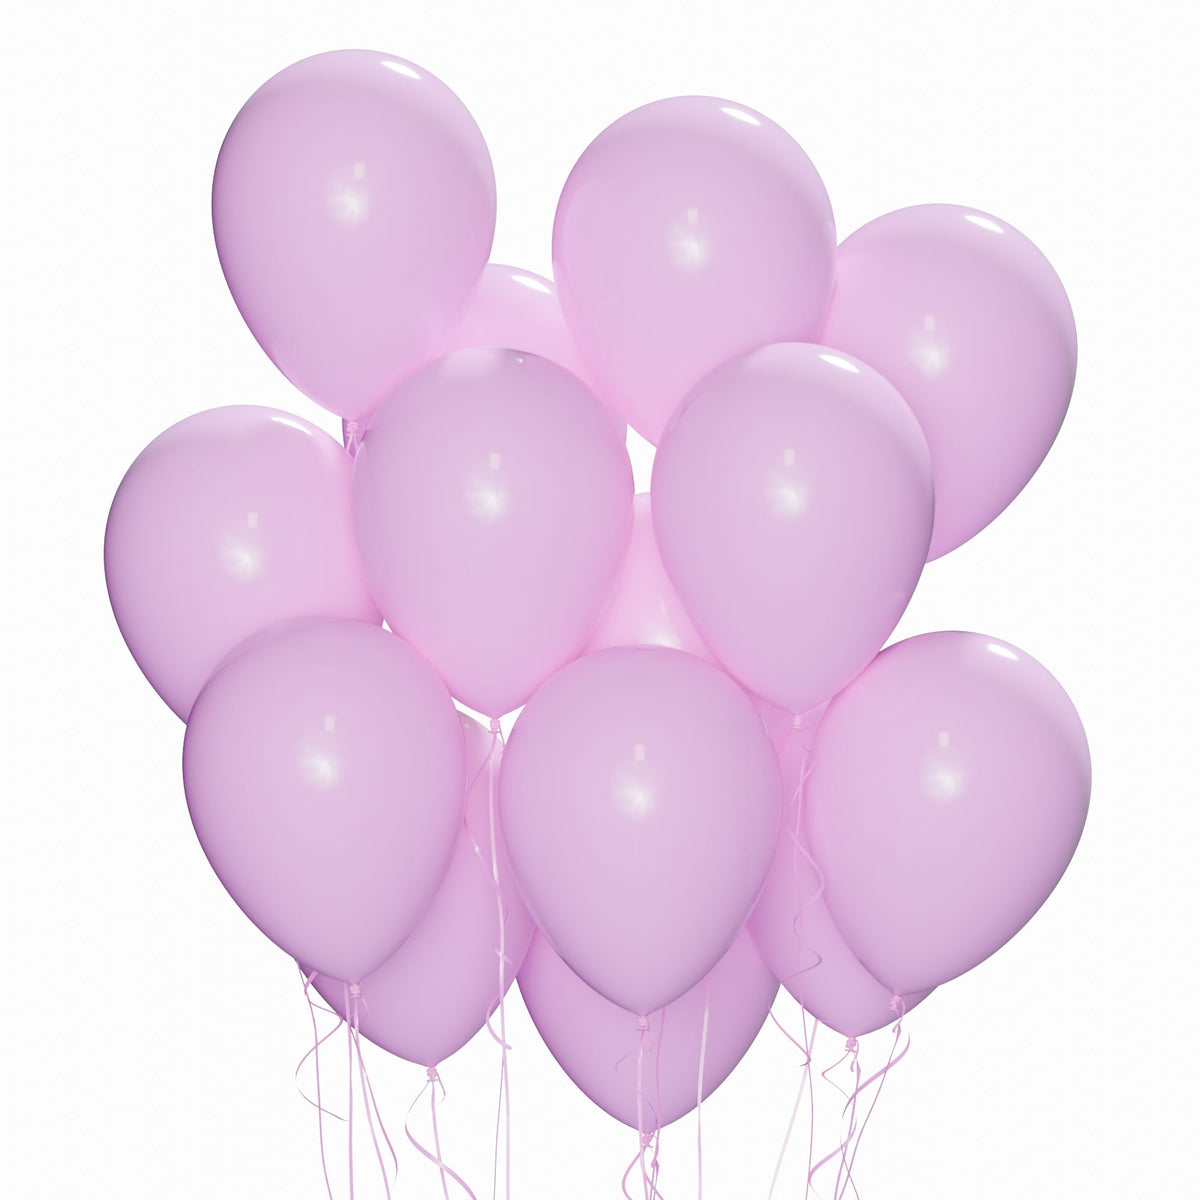 WIDE OCEAN INTERNATIONAL TRADE BEIJING CO., LTD Balloons Purple Latex Balloon 12 Inches, Macaroon Collection, 15 Count 810064199004